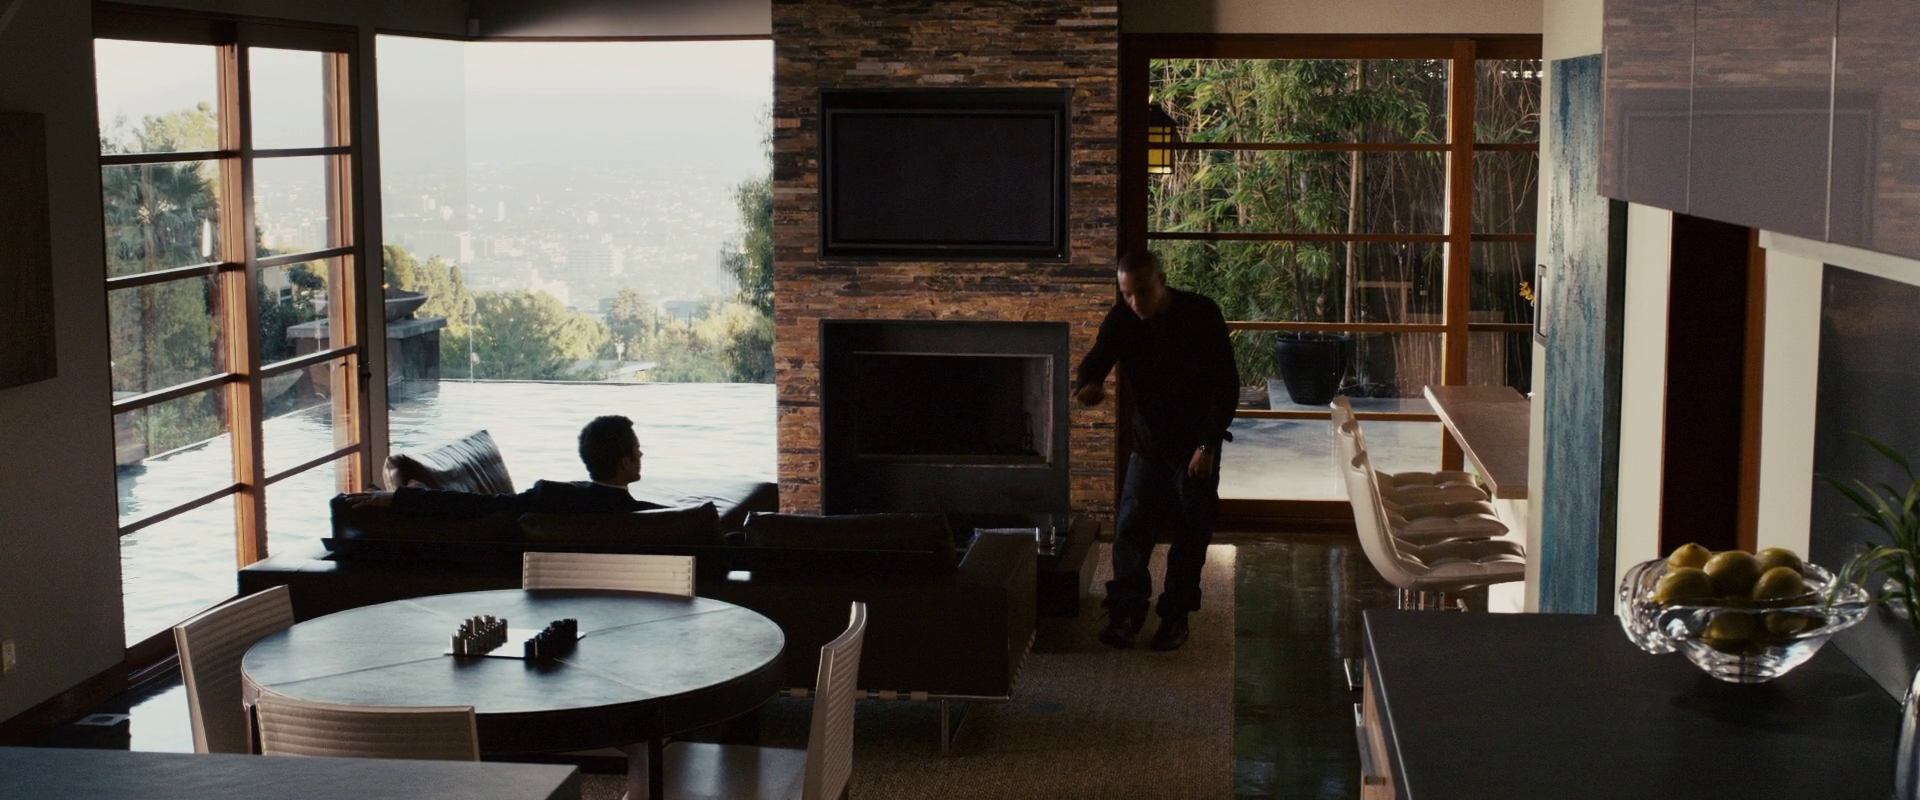 з˰ Takers.2010.1080p.BluRay.x264.DTS-FGT 7.94GB-5.png